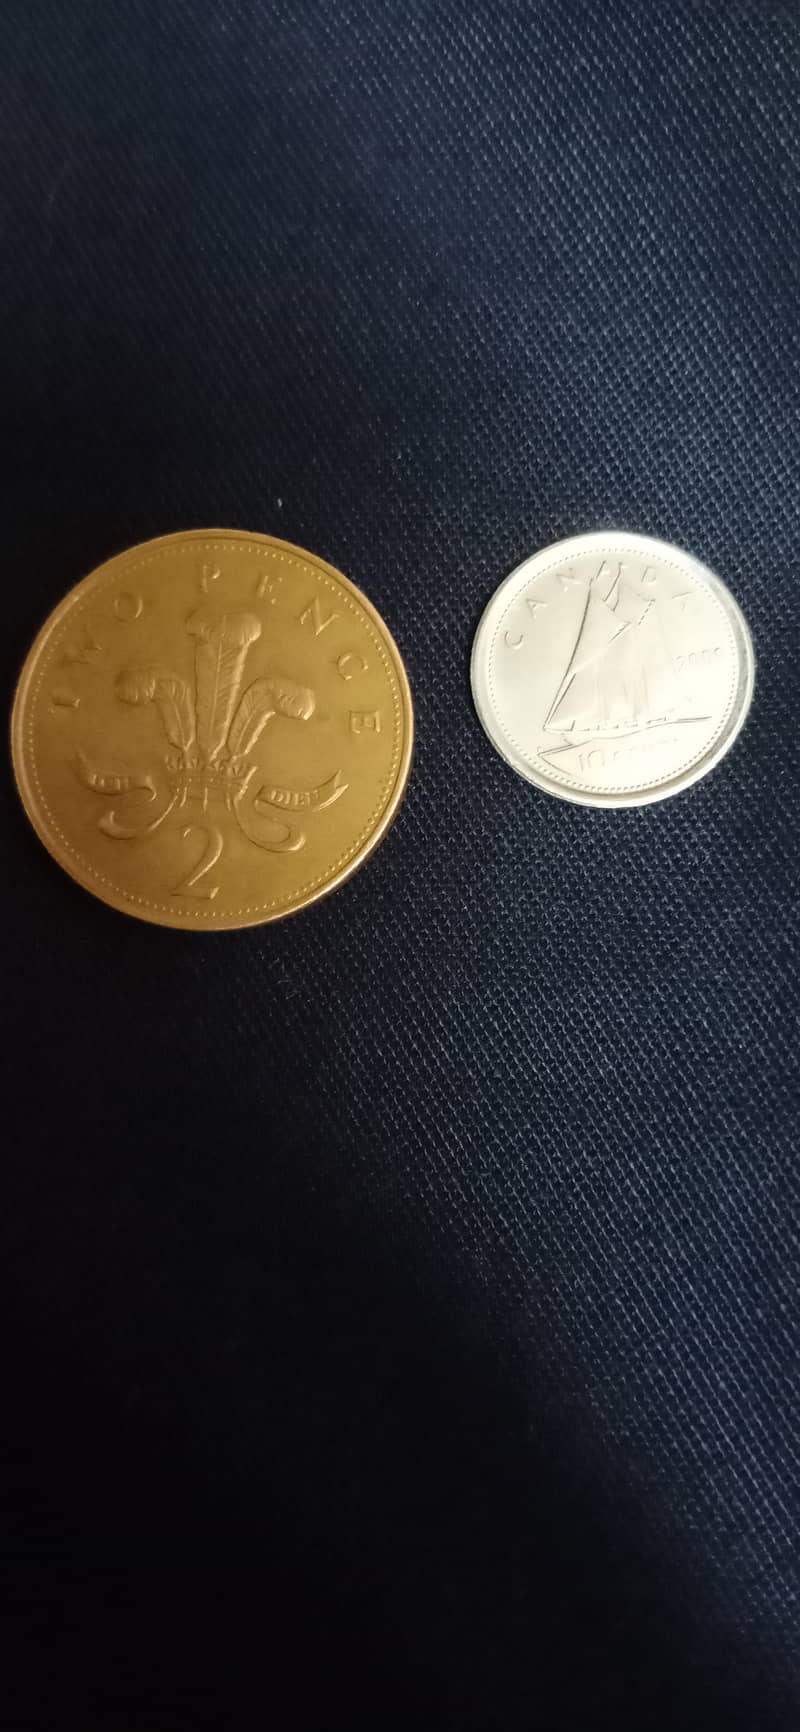 2 pence + Canadian Cents 3